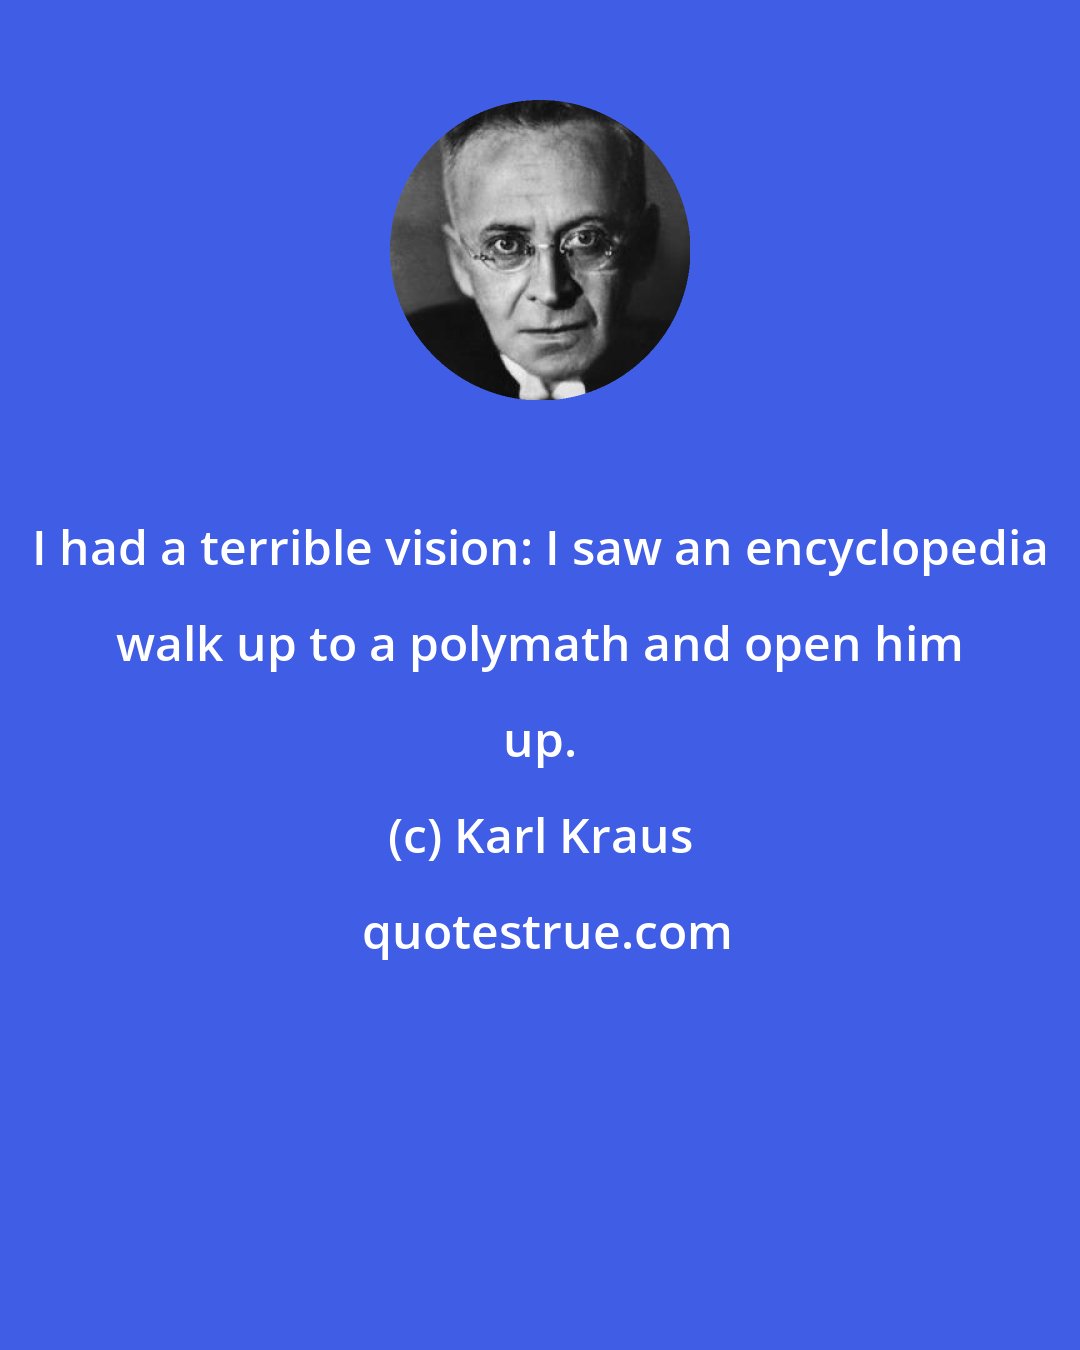 Karl Kraus: I had a terrible vision: I saw an encyclopedia walk up to a polymath and open him up.